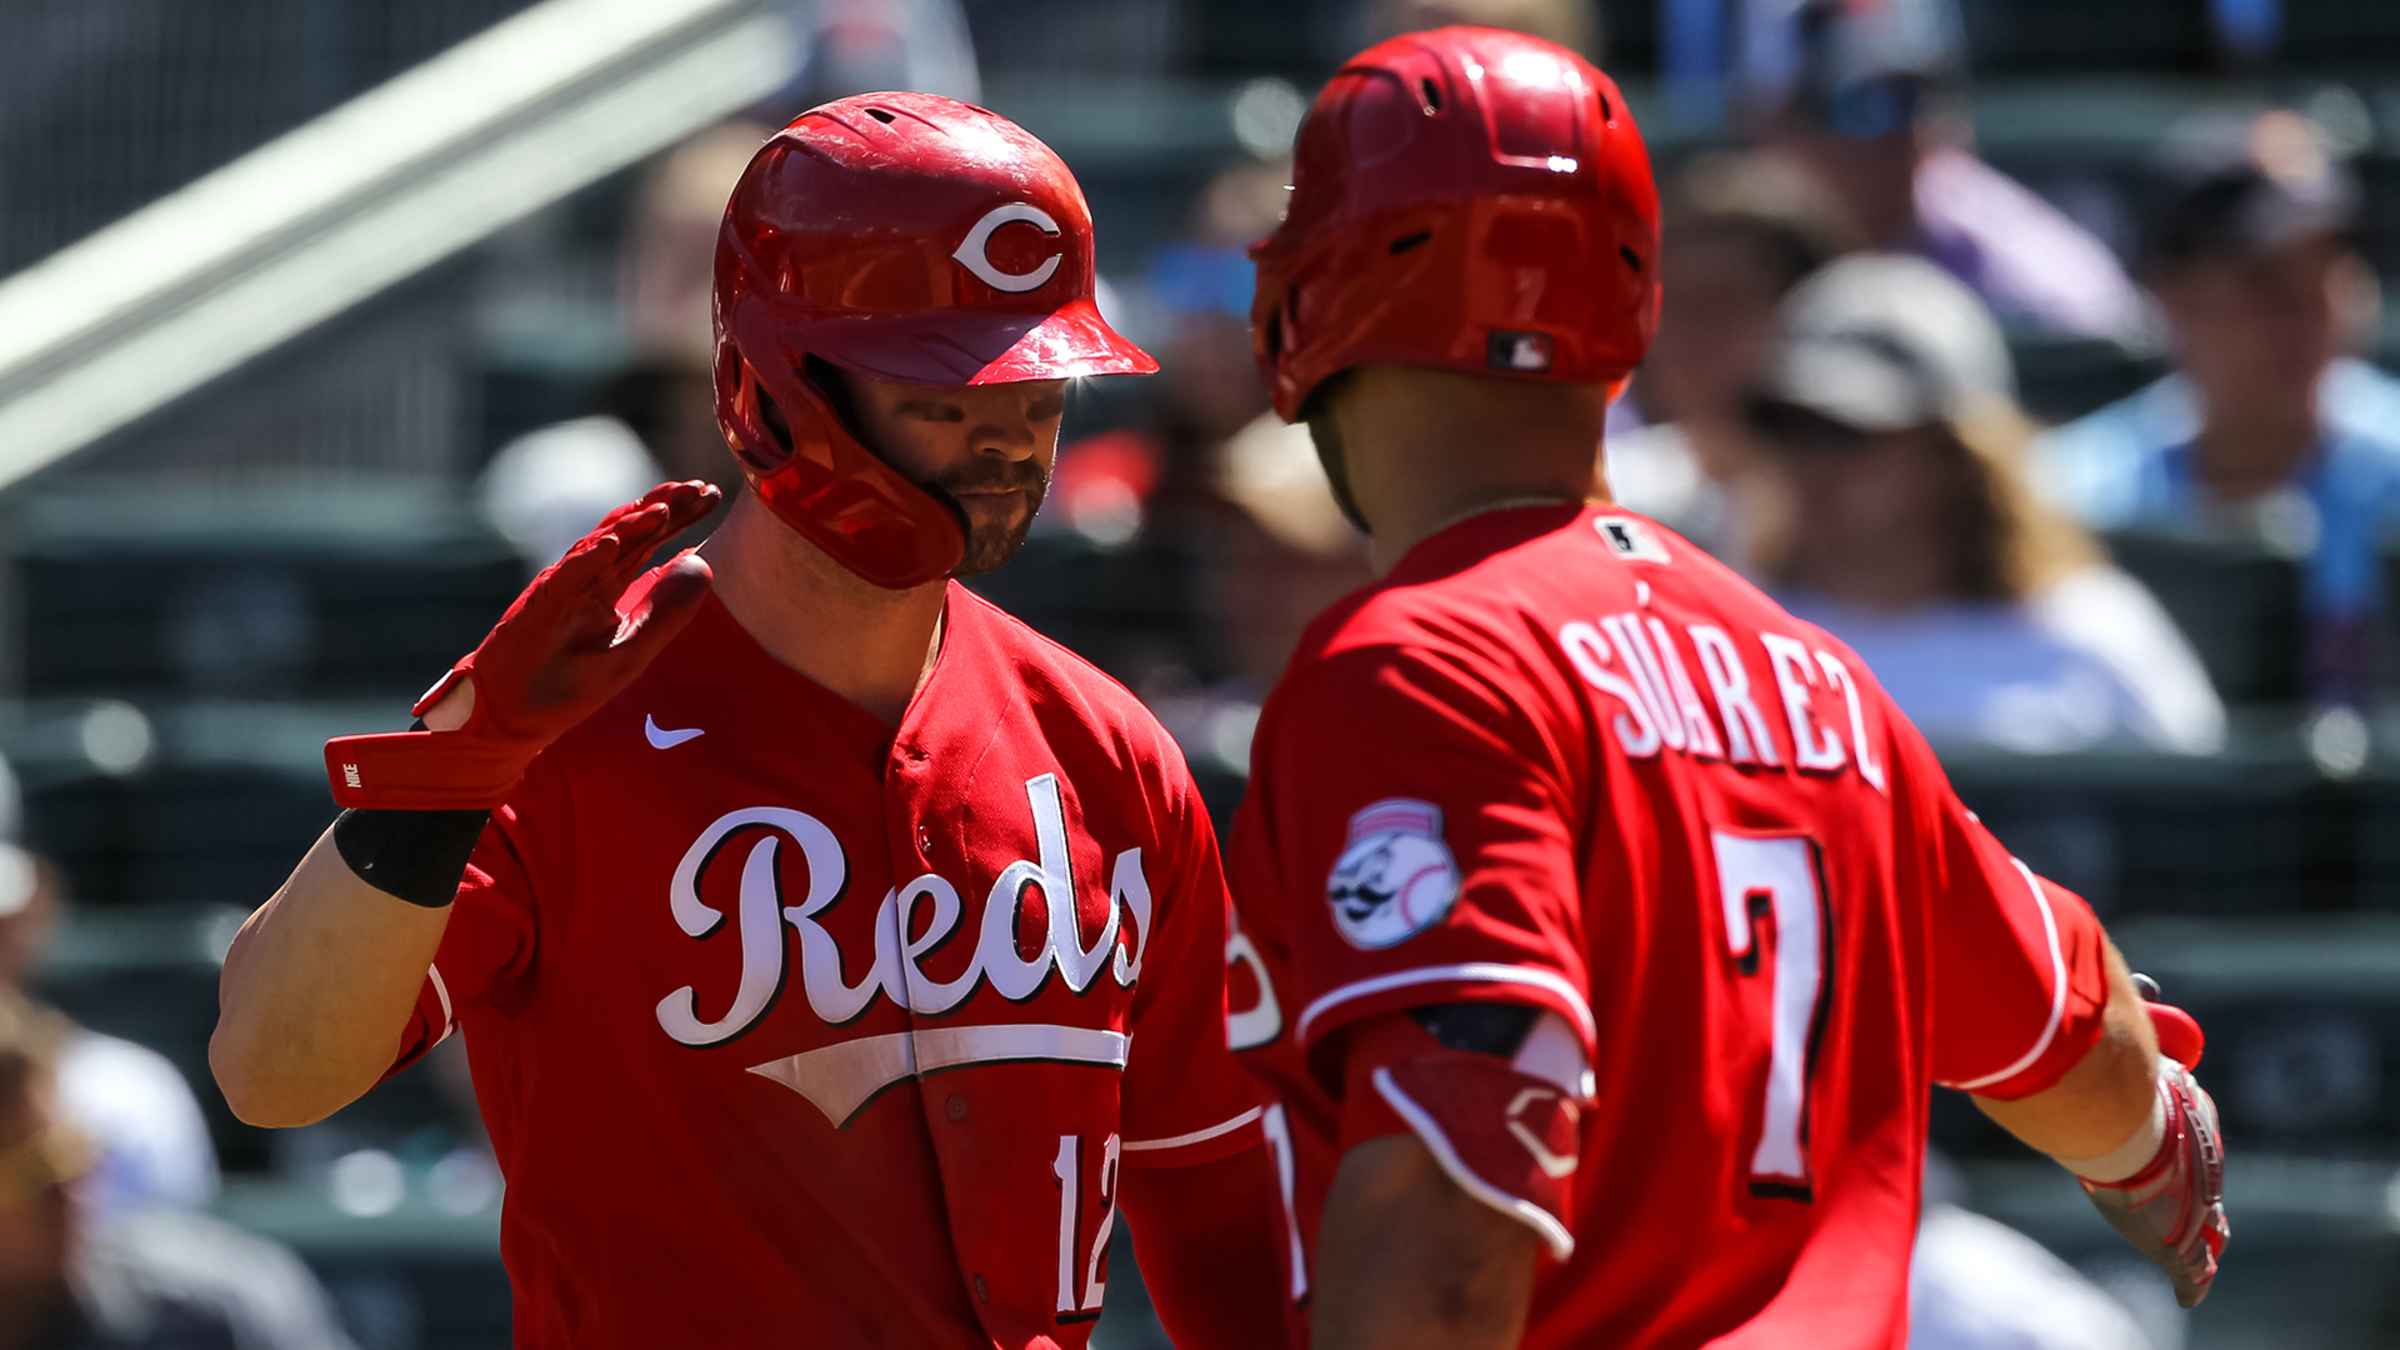 Naquin's 3-run homer in 9th gives Reds 10-7 win over Twins